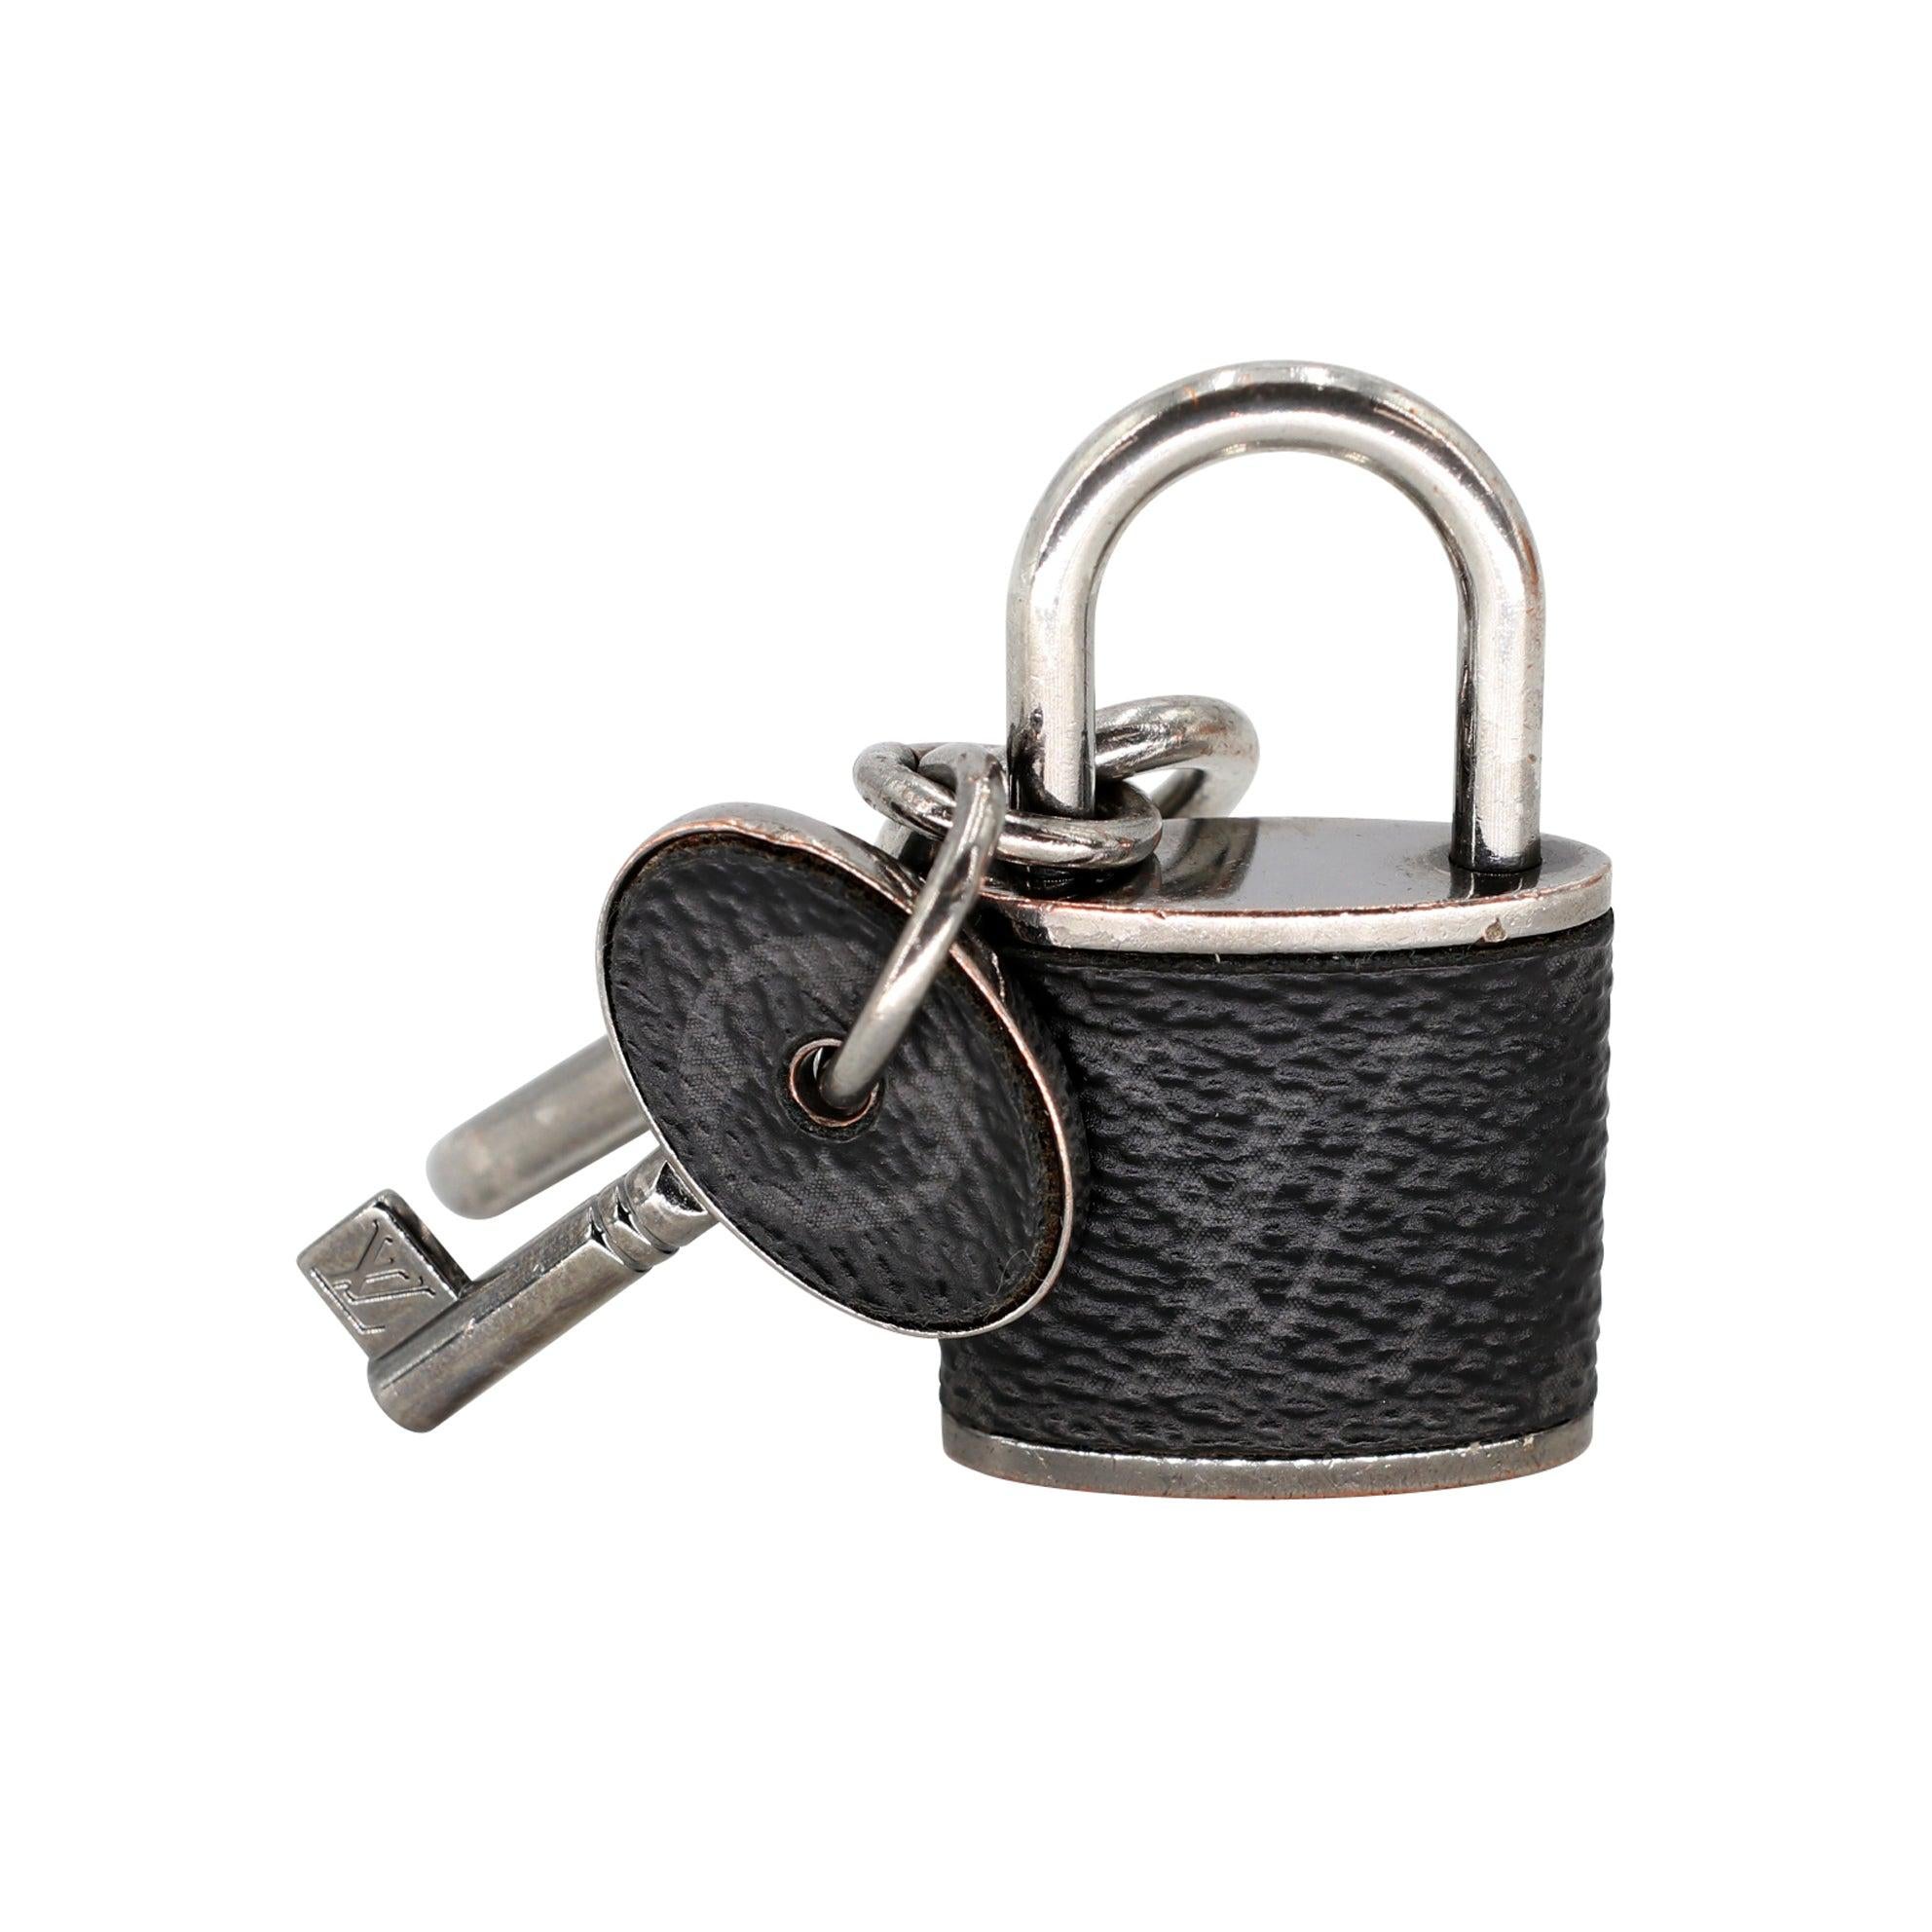 Vuitton Key Lock - For Sale on 1stDibs | lv lock and key